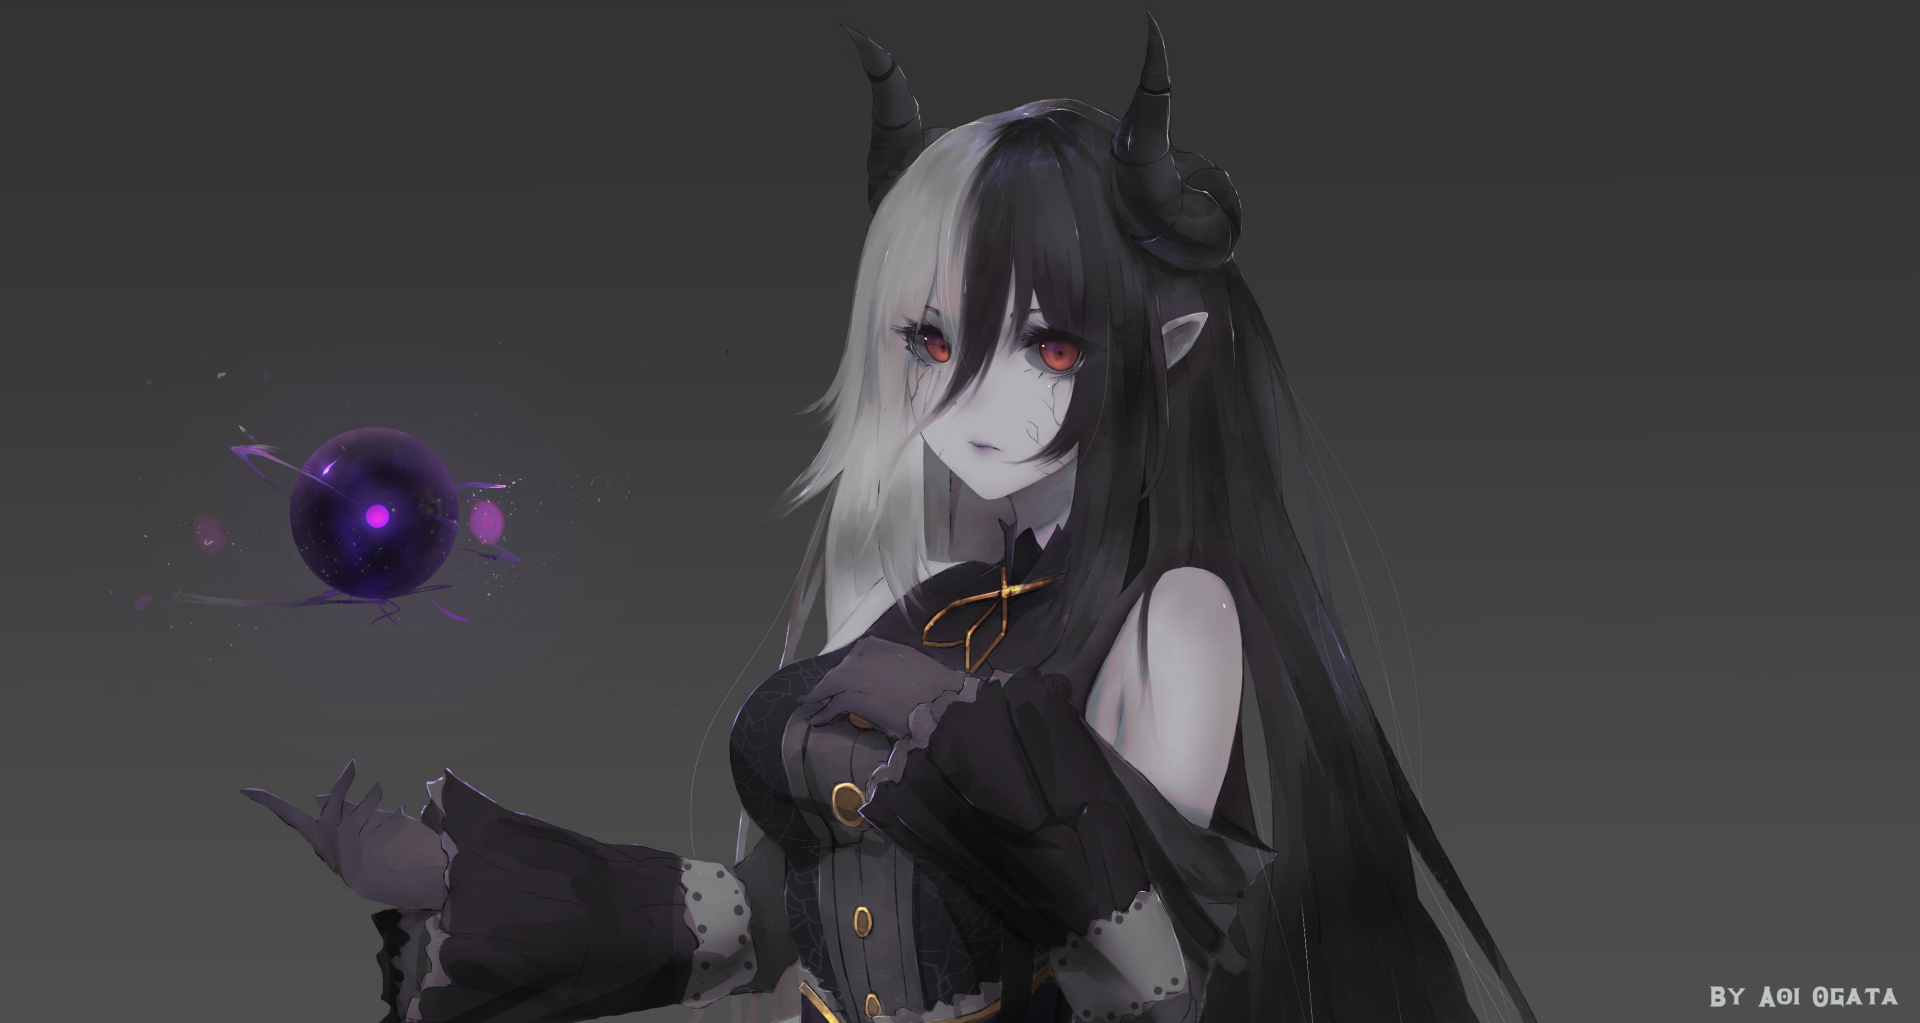 Hd Horns And Red Eyes Anime Wallpaper By Aoi Ogata 3174